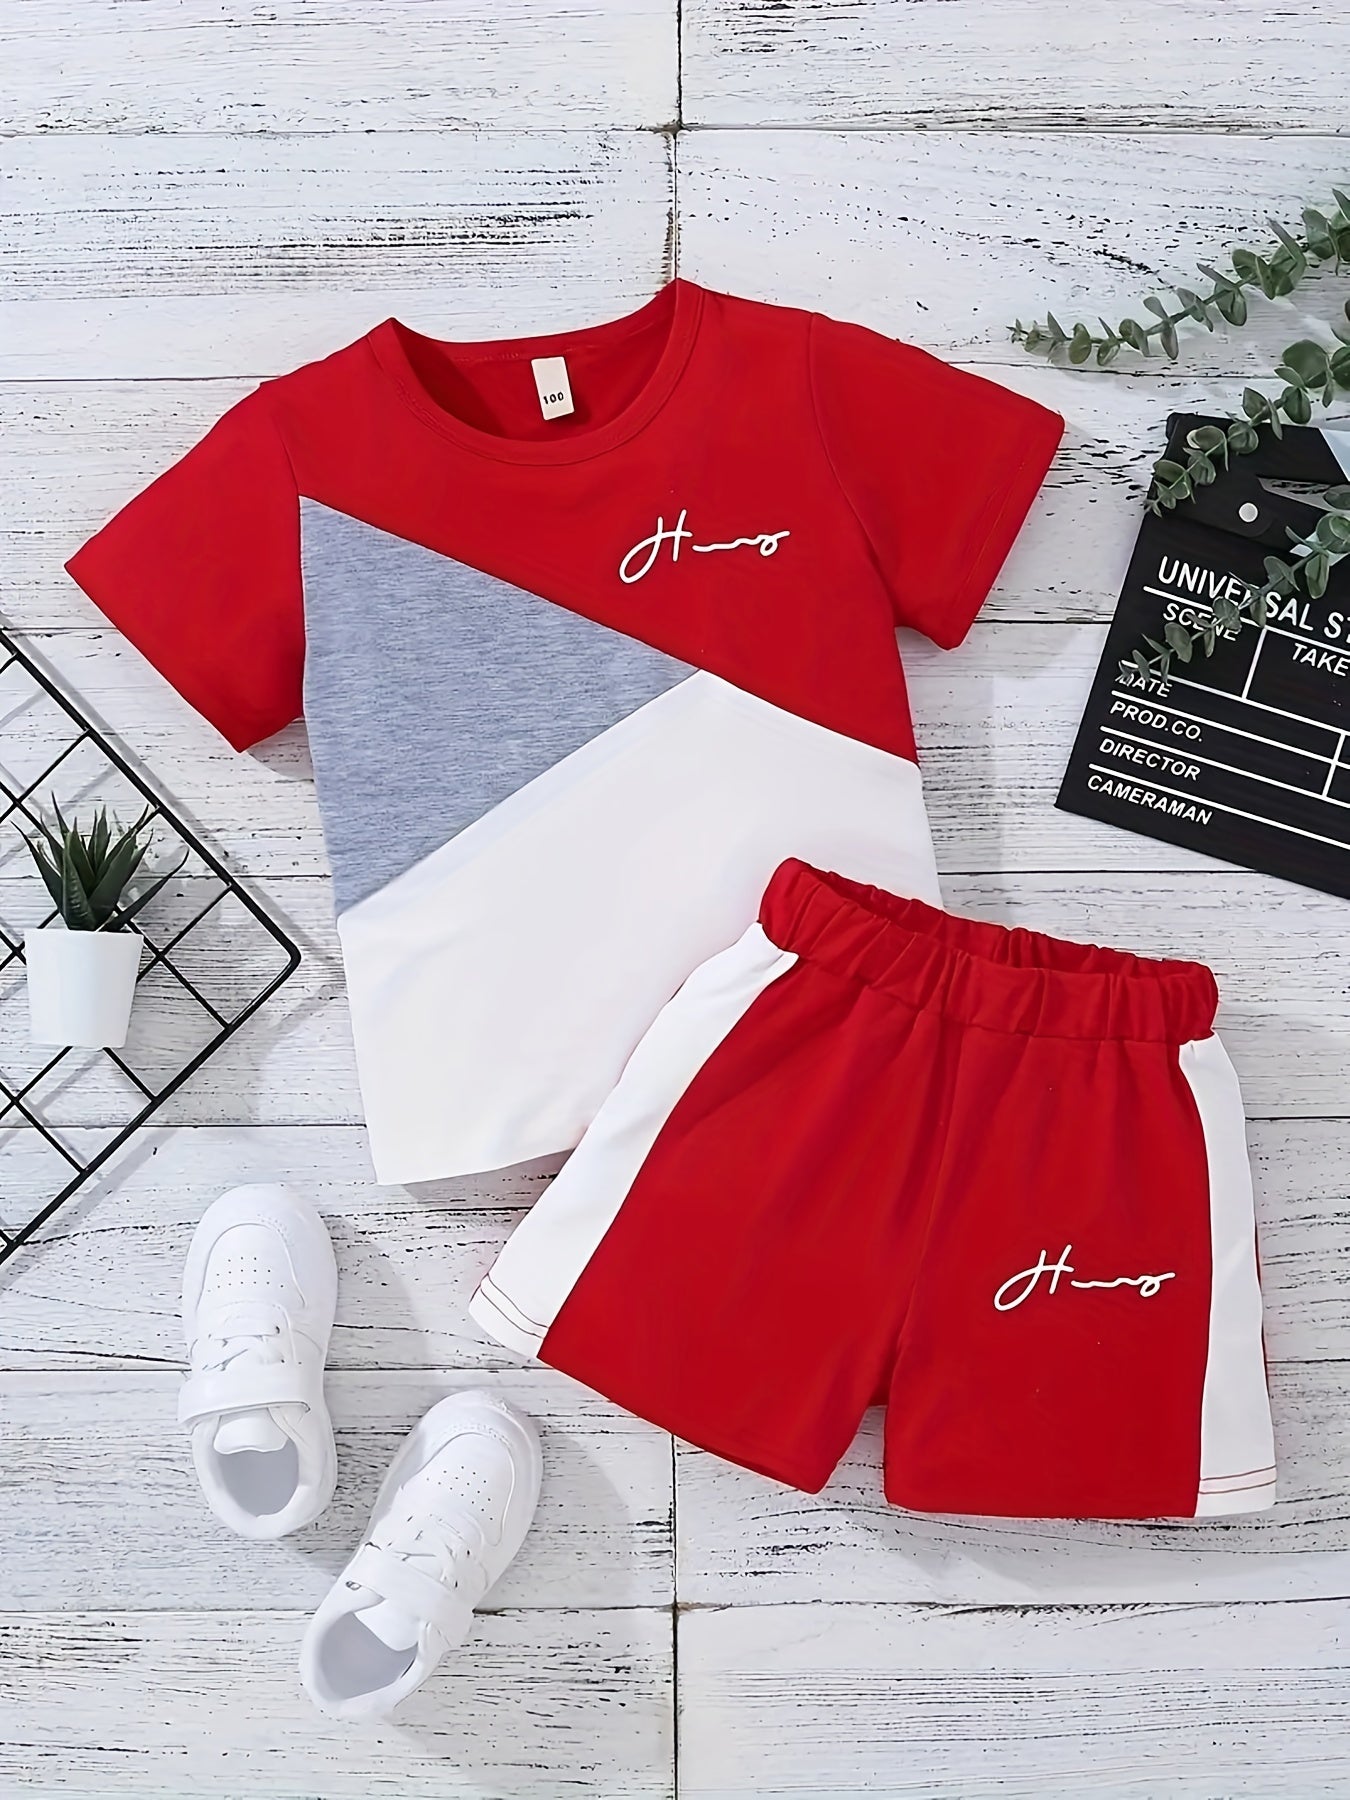 Boys Color Block Casual Outfit Round Neck T-shirt & Shorts Kids Summer Clothes Sets